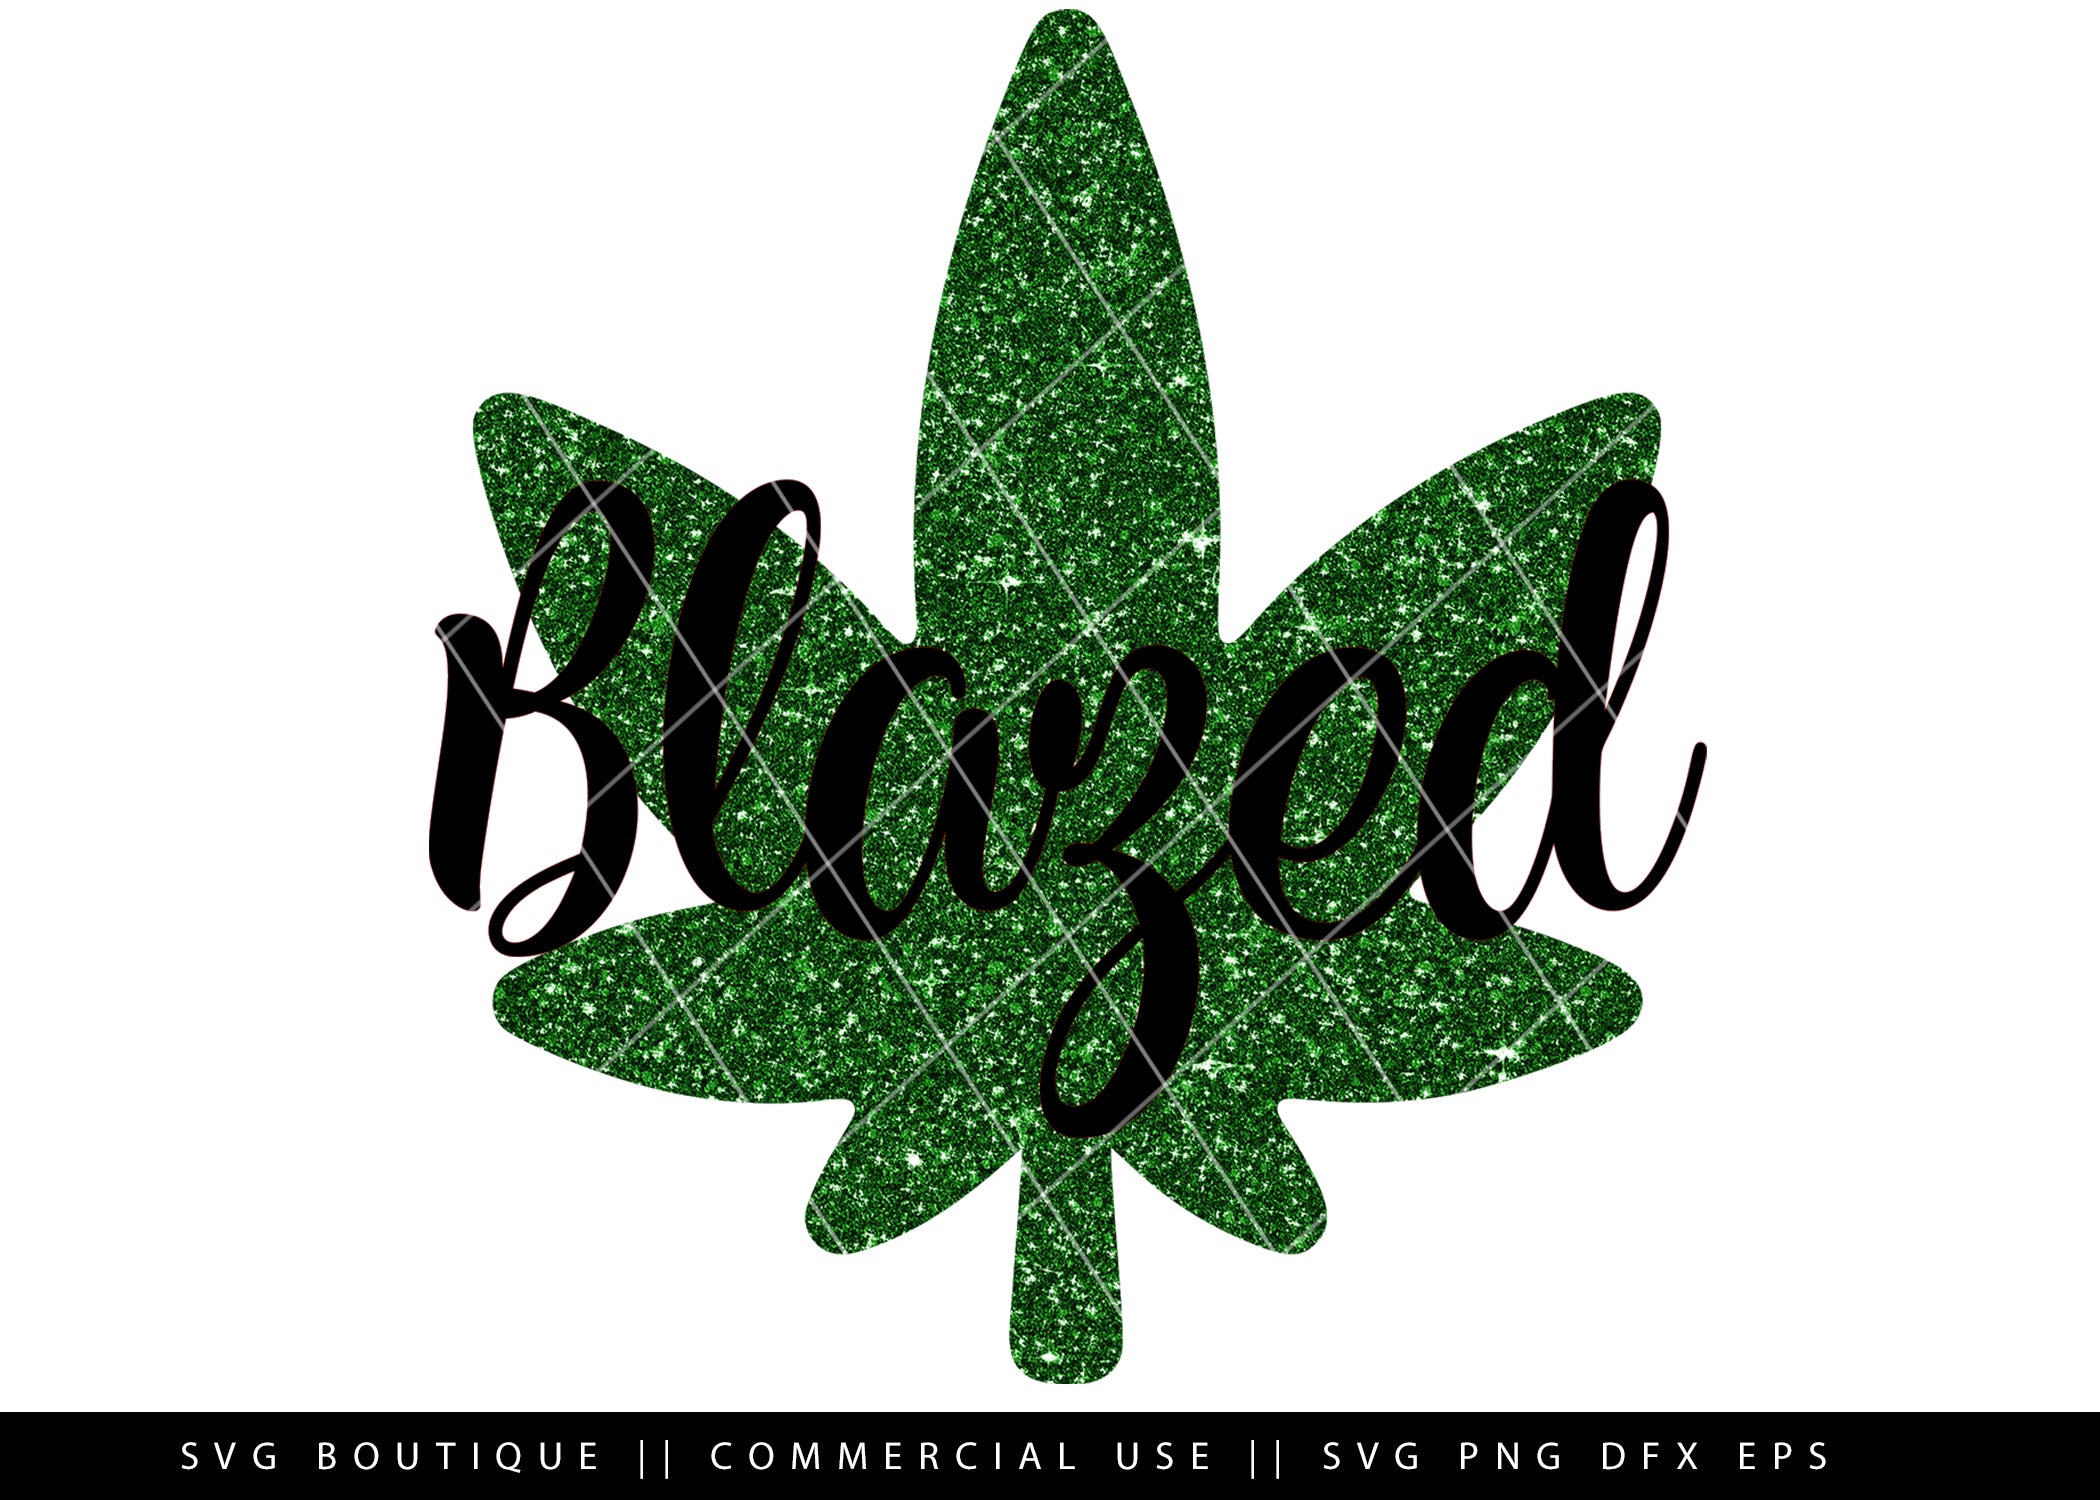 Blazed Weed Dope Svg Files Cut File For Silhouette And Cricut Cutt Svg Boutique